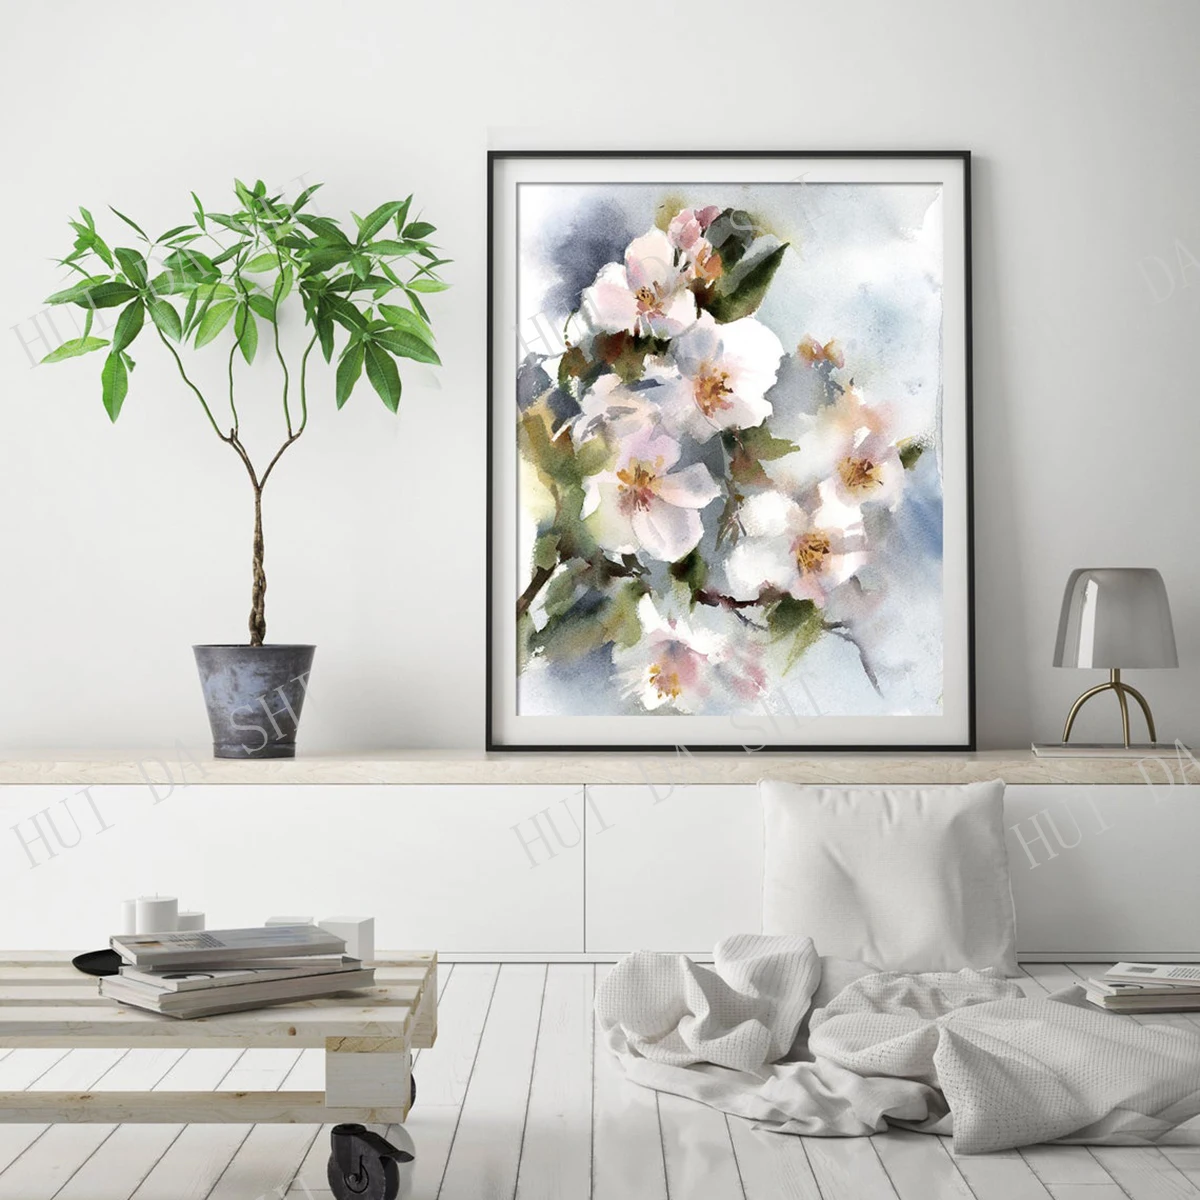 

Almond Blossoms Art Print, Blooming Tree Floral Watercolor Painting, Flowers Botanical Wall Giclée Fine Art Print